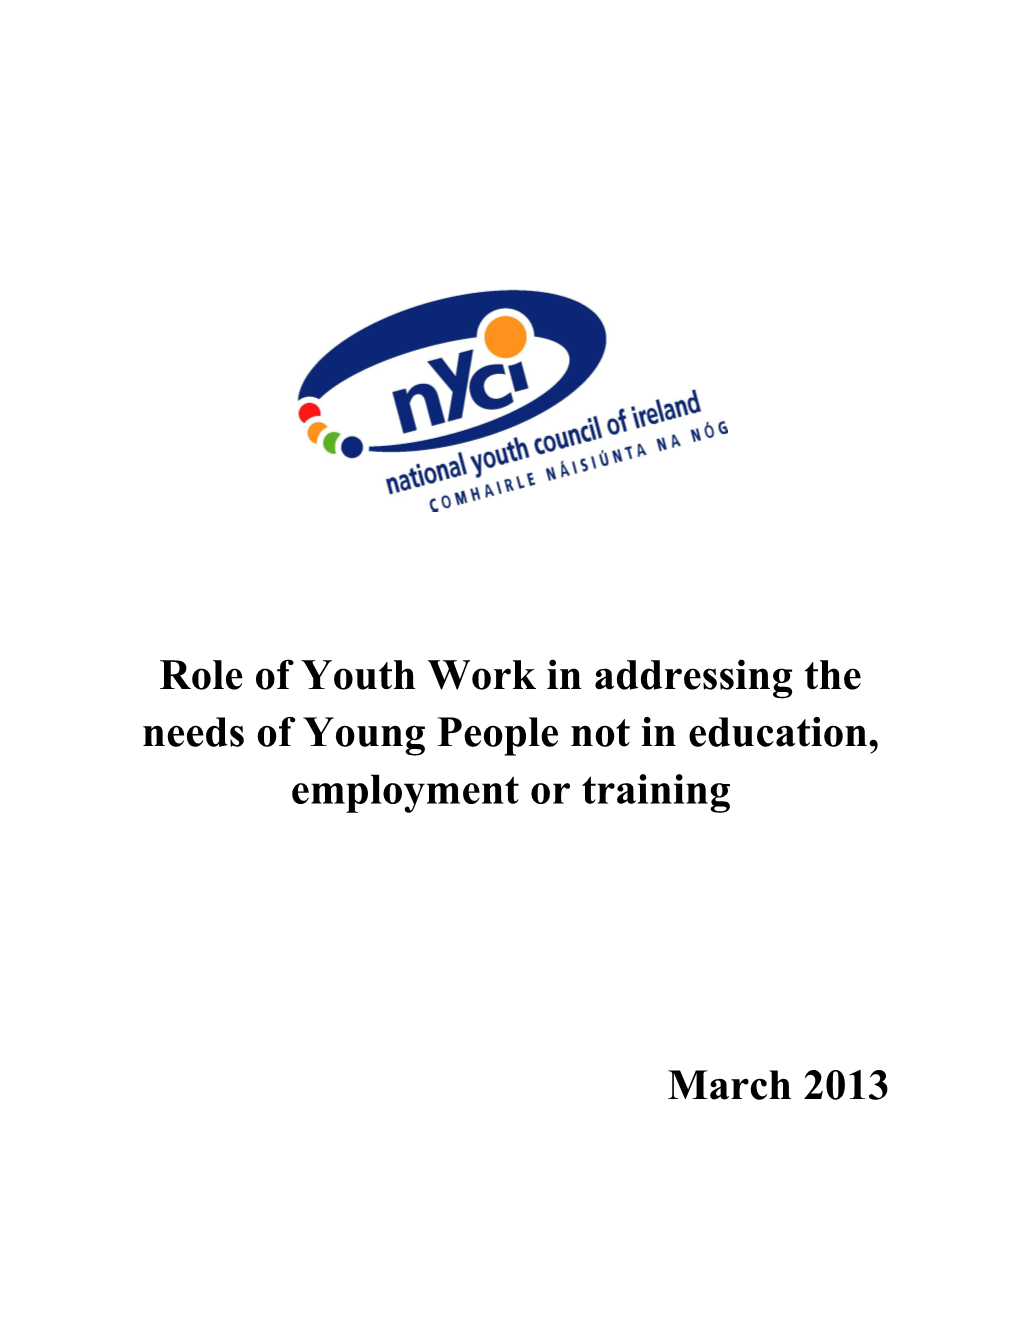 Role of Youth Work in Addressing the Needs of Young People Not in Education, Employment